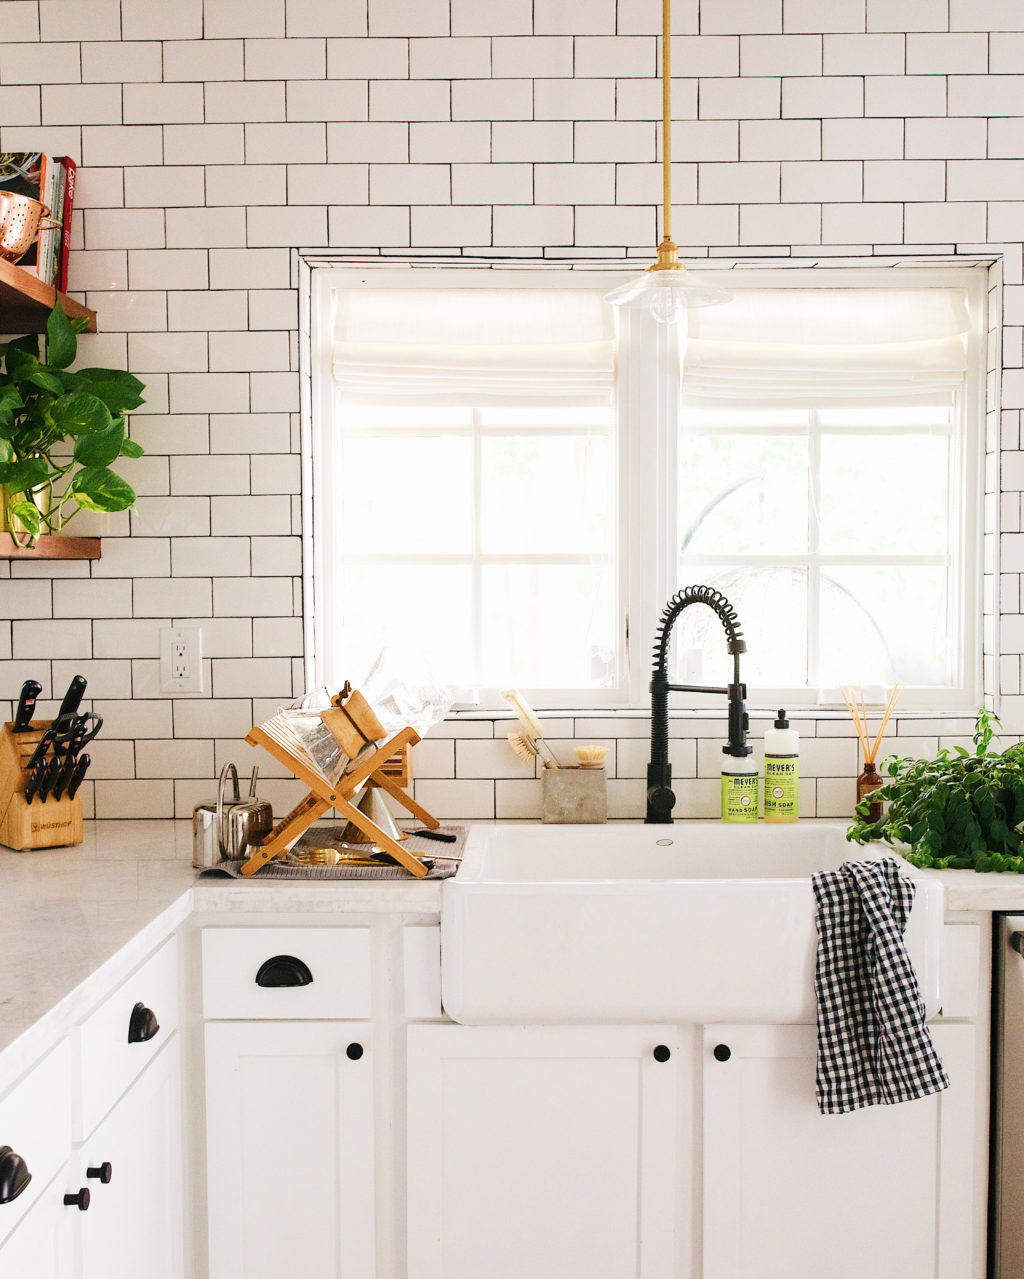 Our Kitchen: Get the Look Wash & Prep